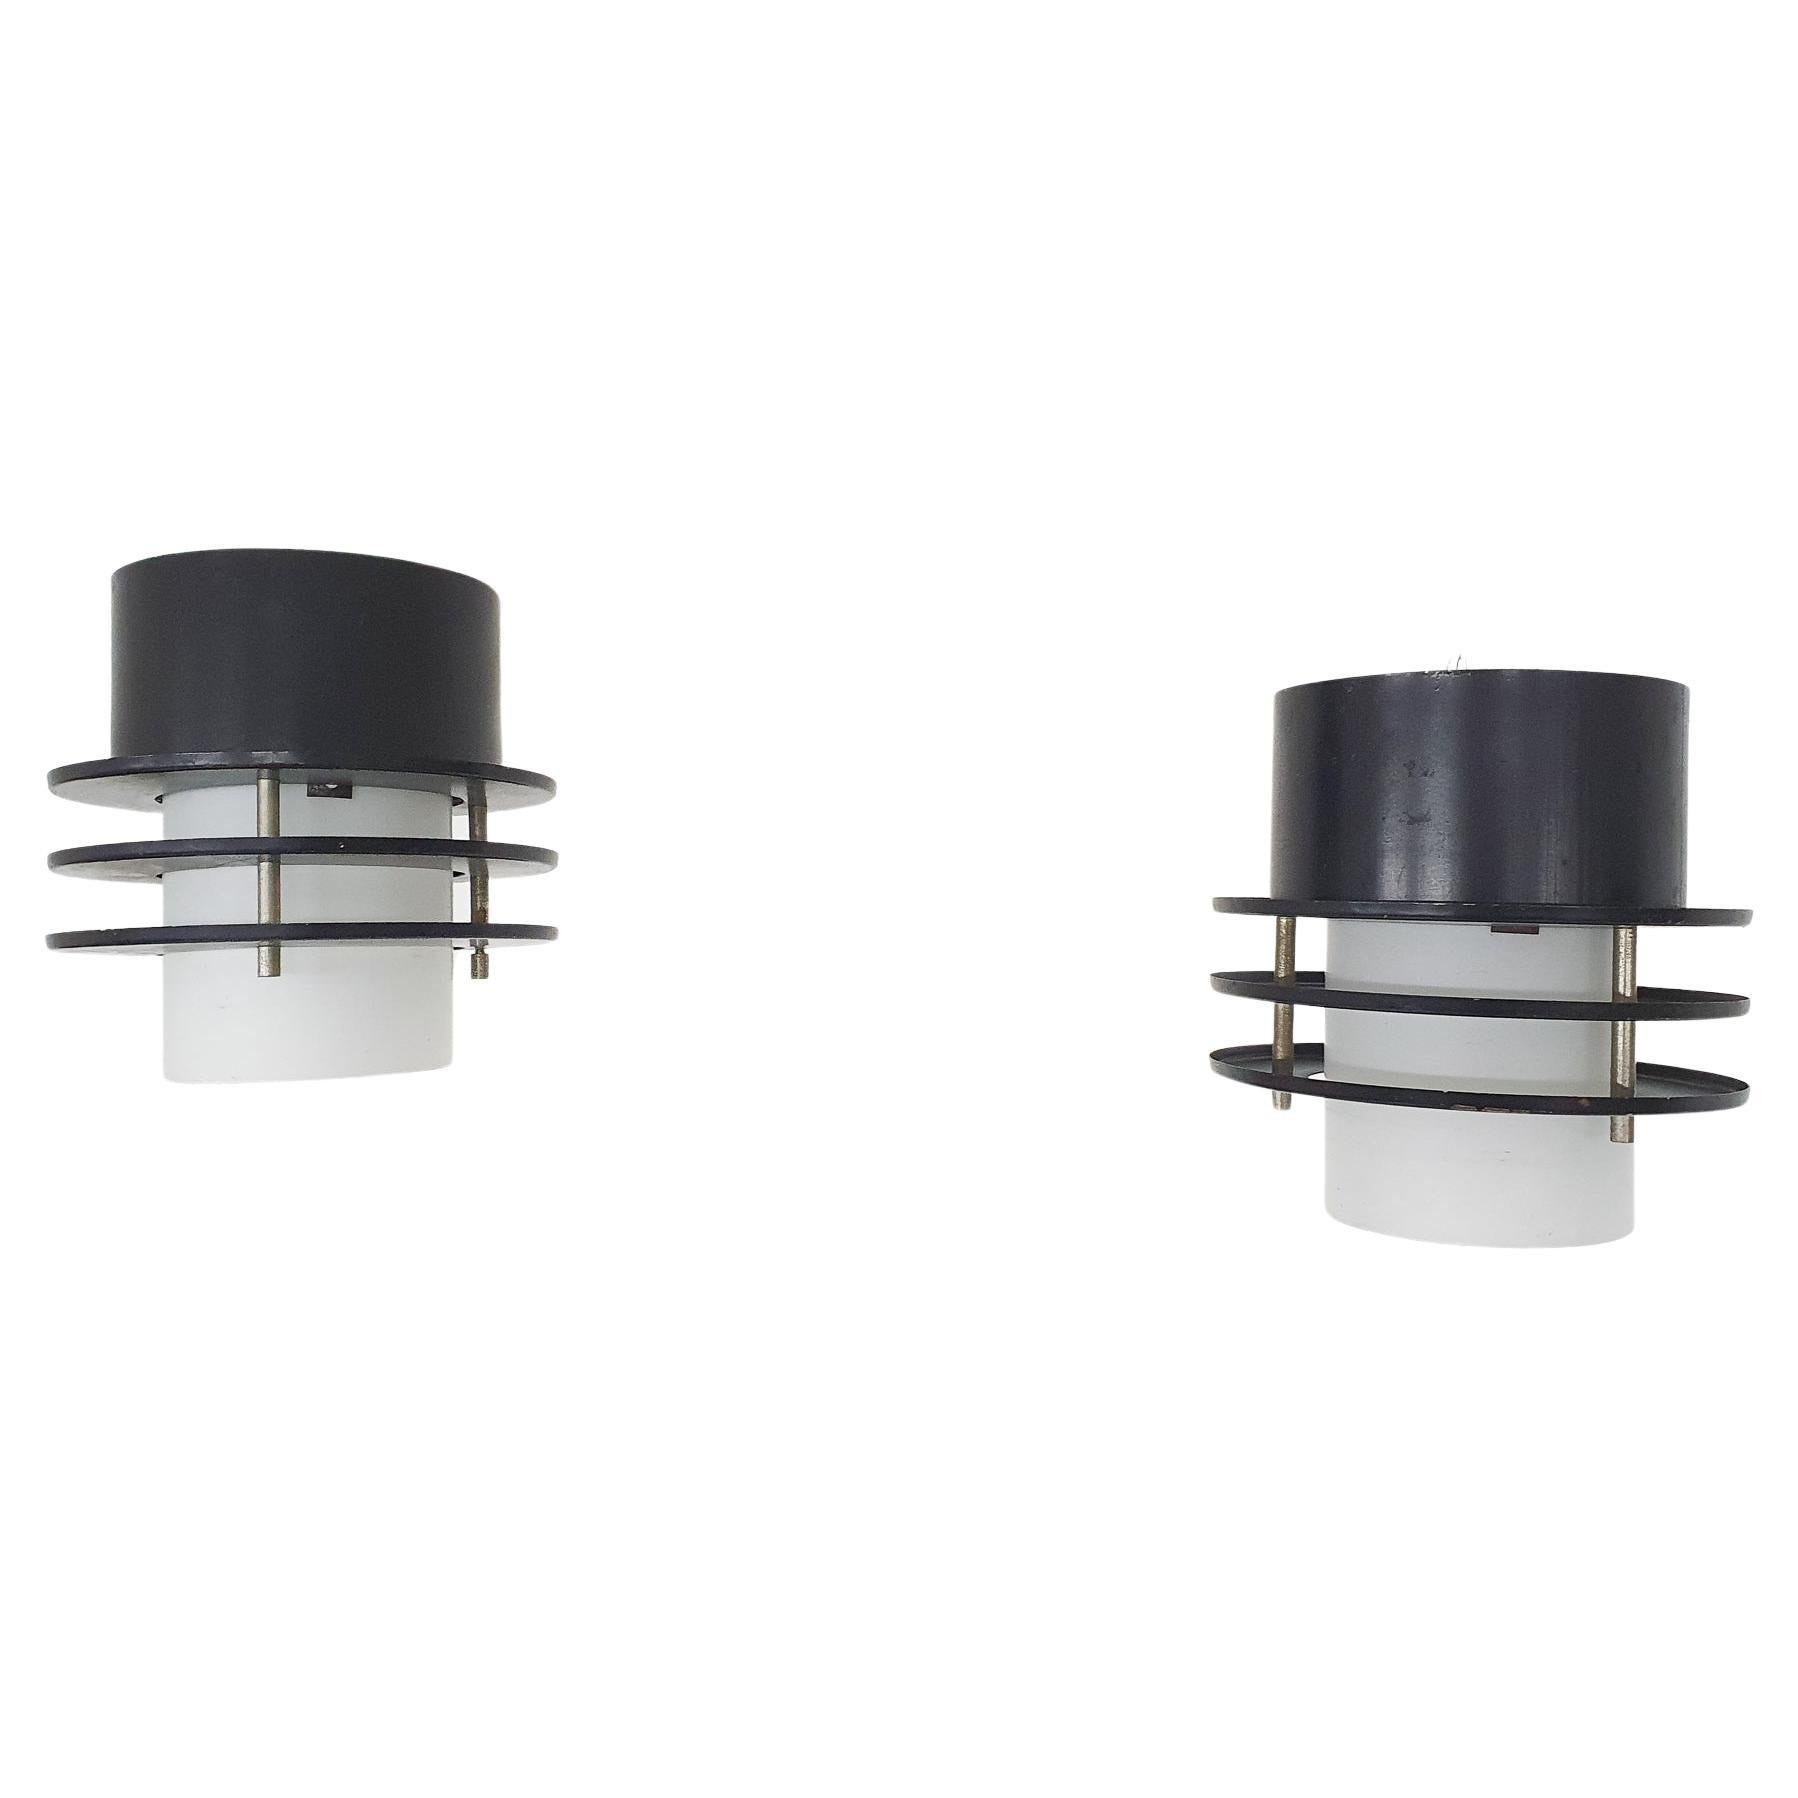 Set of Two Minimalistic Ceiling Lights in Glass and Metal, the Netherlands '60s For Sale